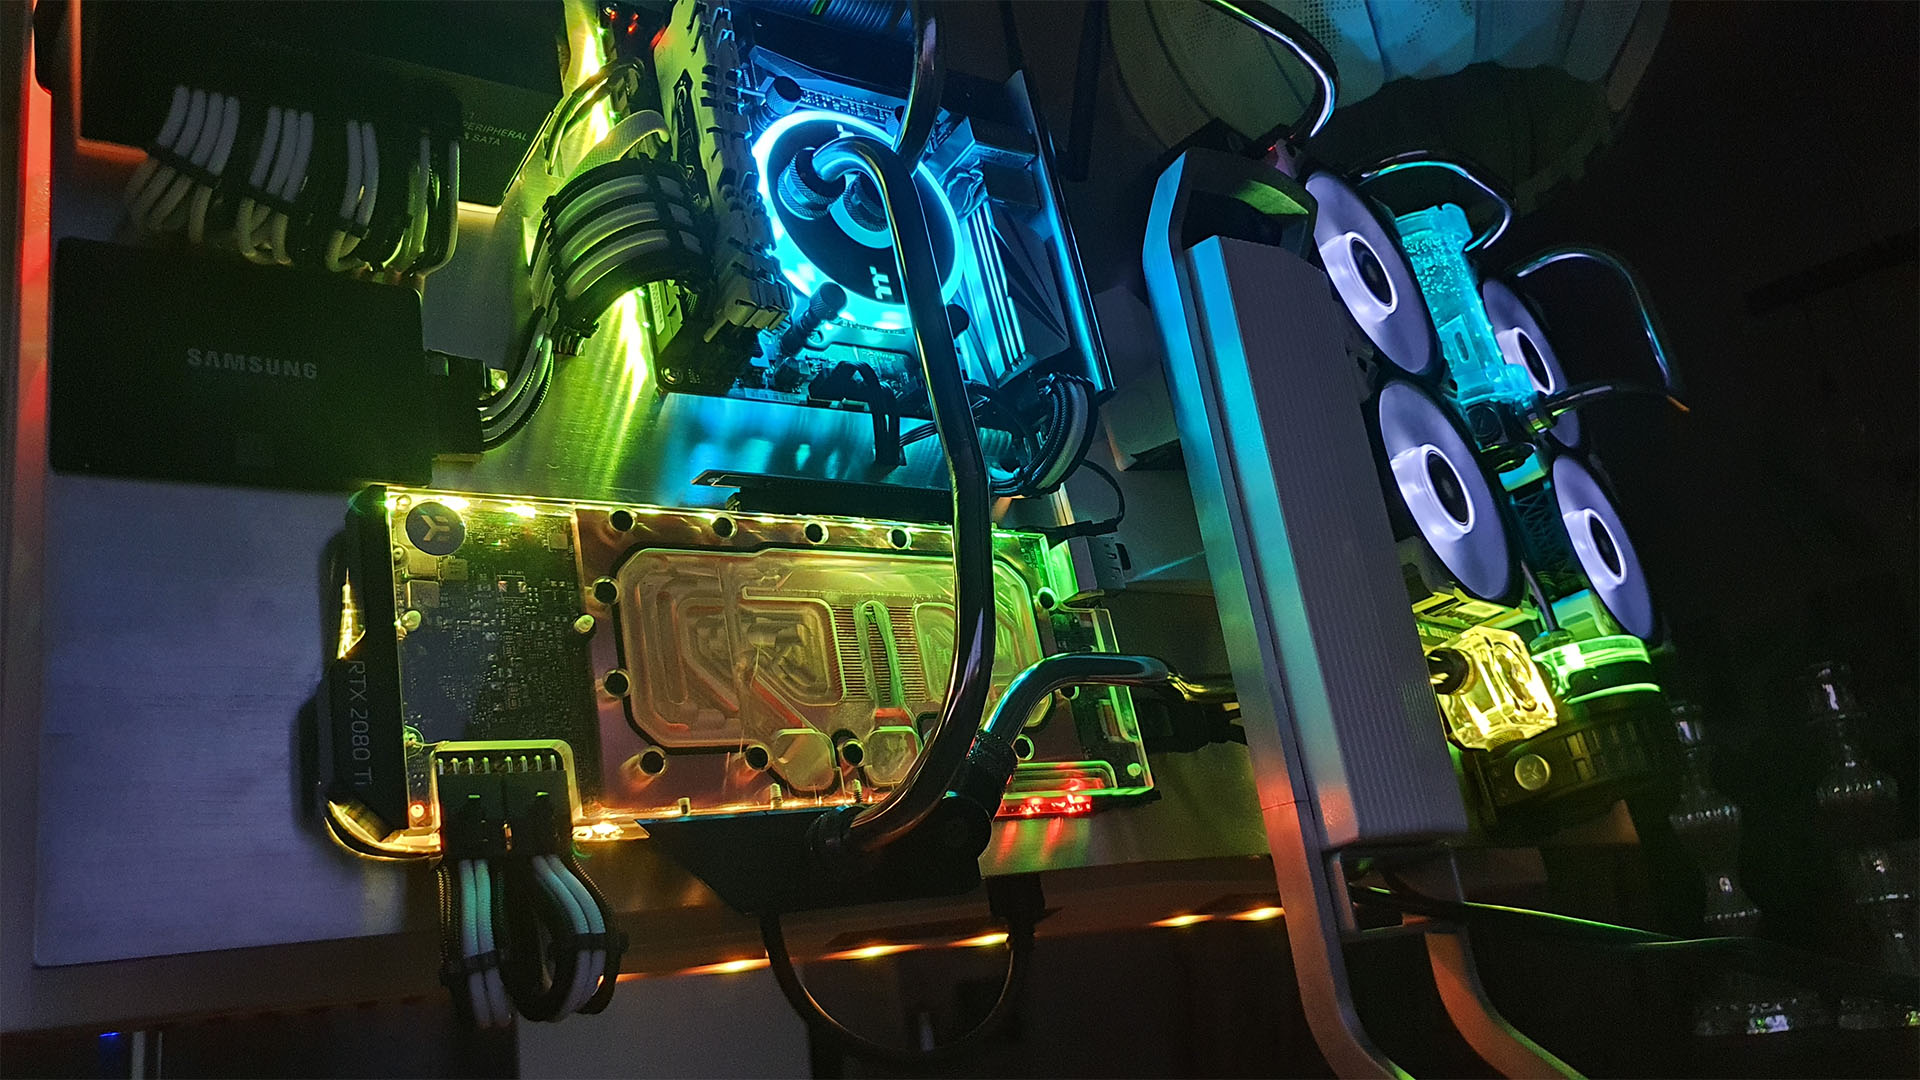 The ipredator gaming pc all lit up in blue yellow and green